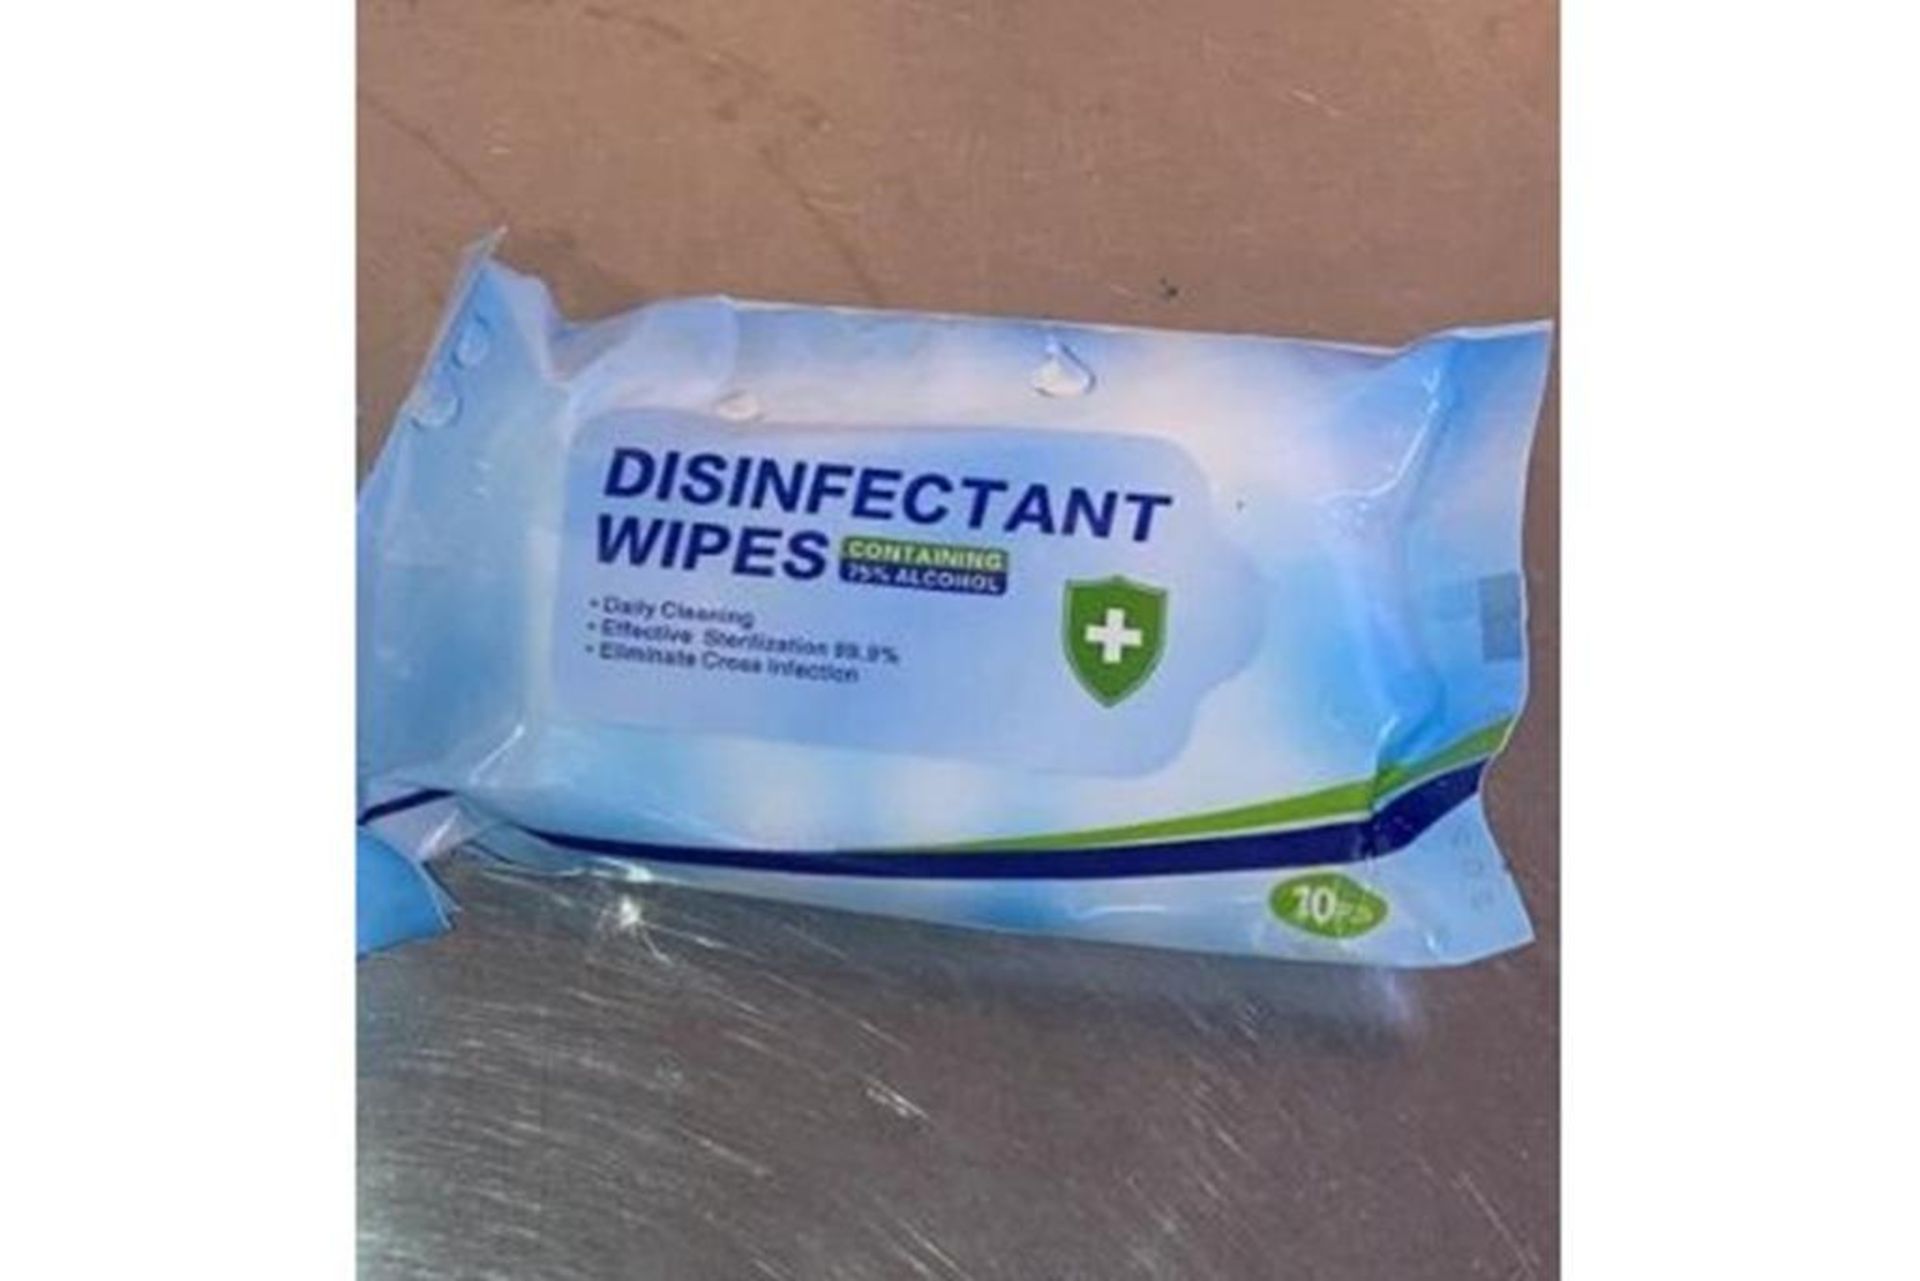 2400 Antibacterial Disinfectant Wipes (75% alcohol) - Image 3 of 3